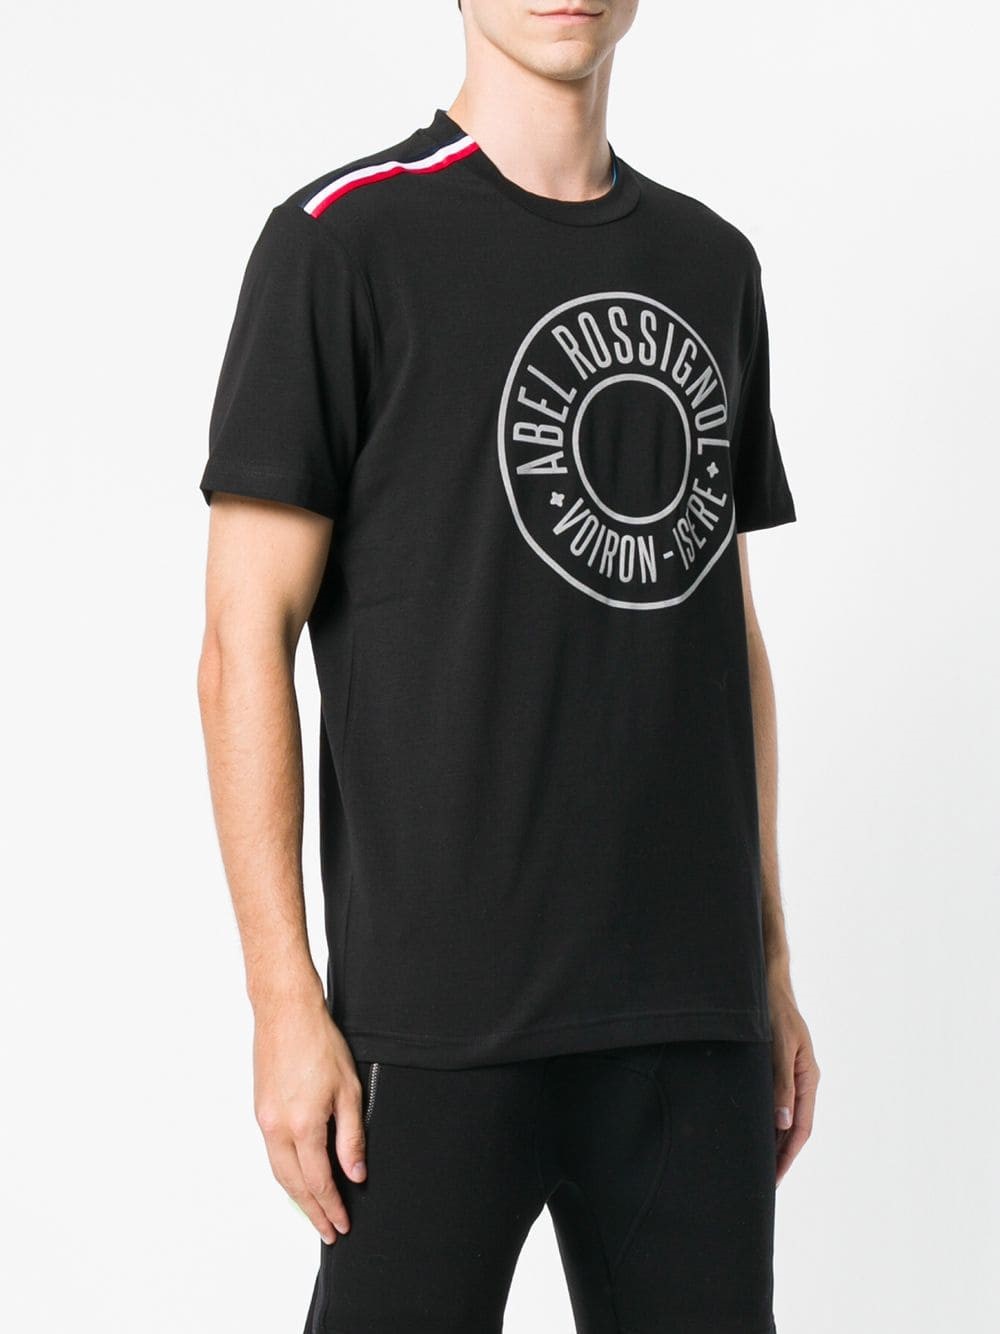 rossignol BORROME T-SHIRT available on montiboutique.com - 24675